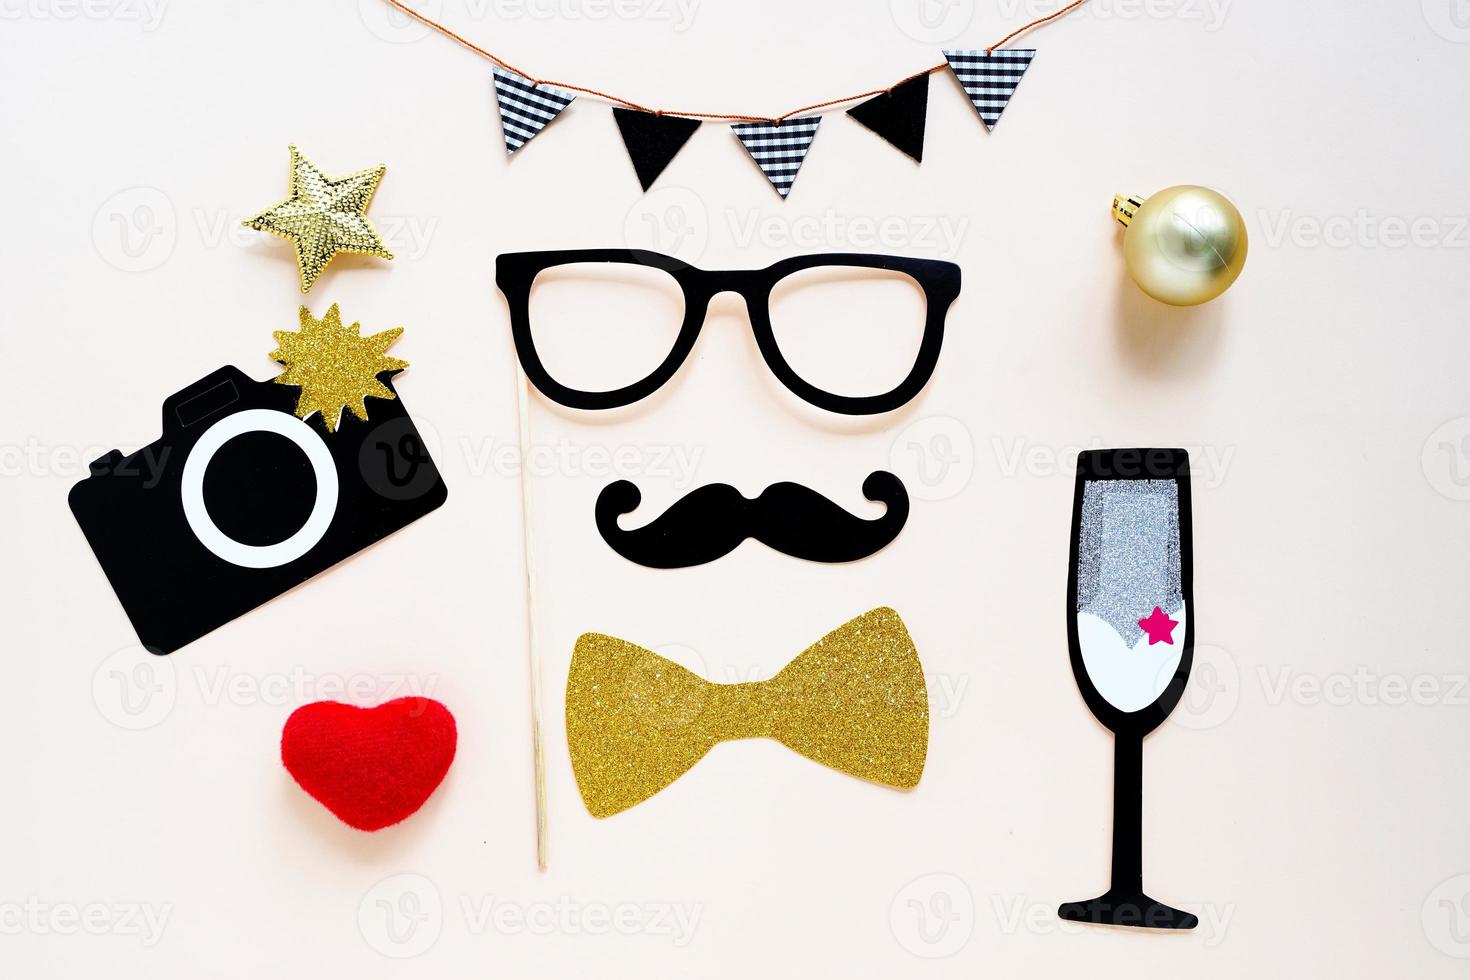 Cute party props accessories on colorful background, happy new year party celebration and holiday concept photo